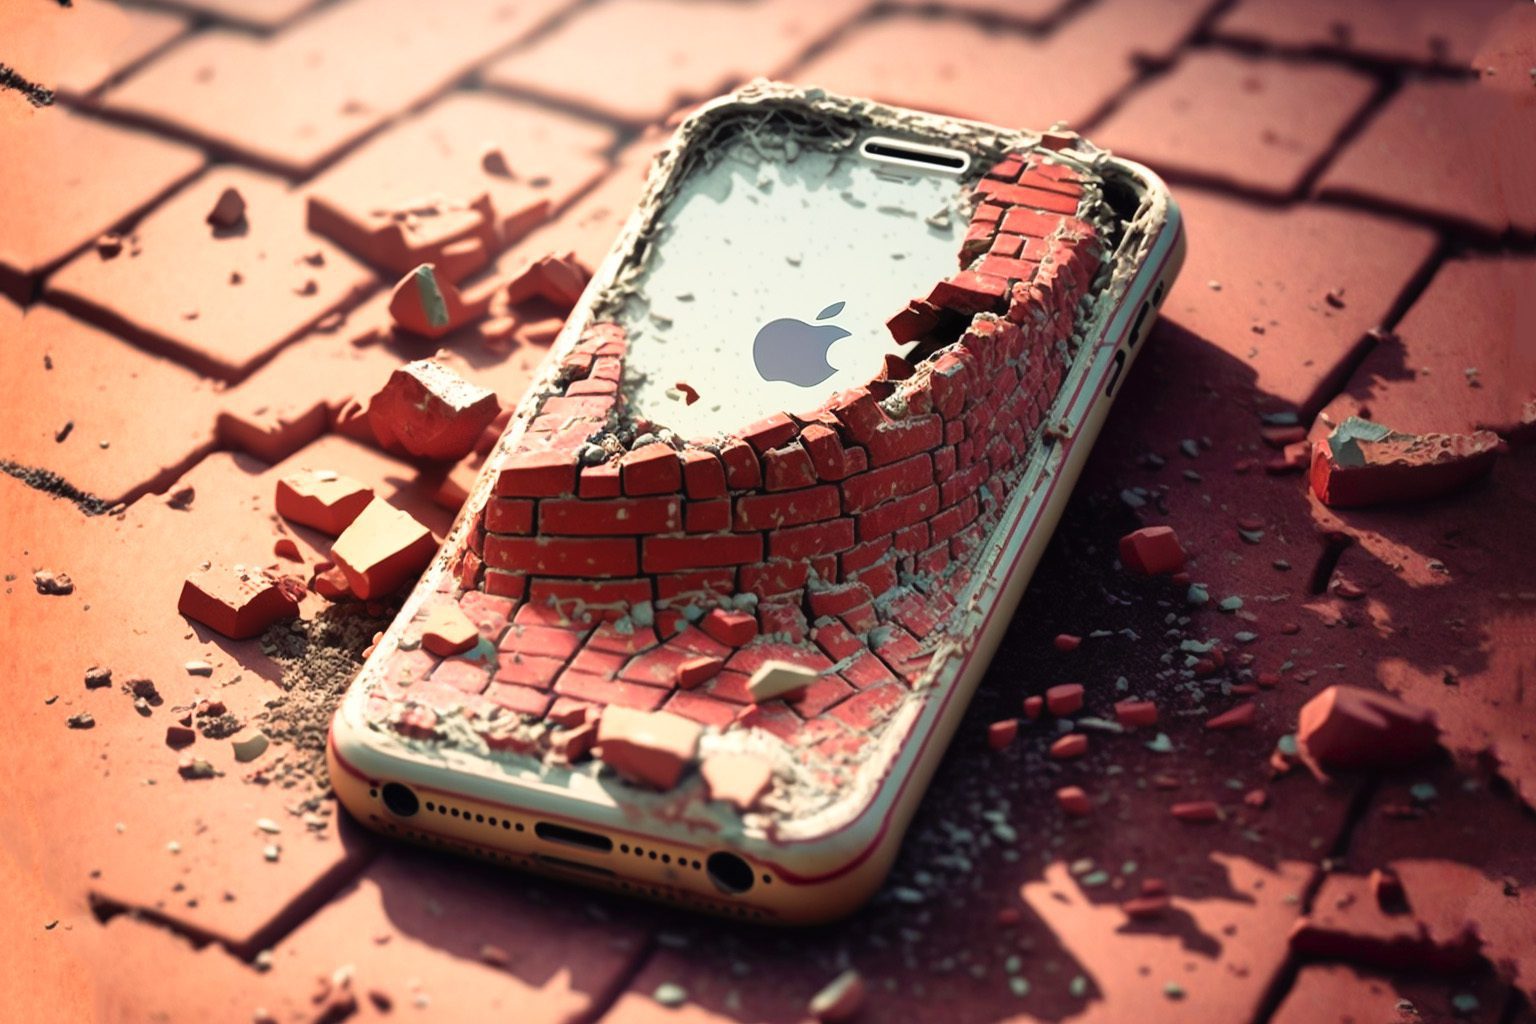 Practical as a brick - that's how you could describe a bricked iPhone.